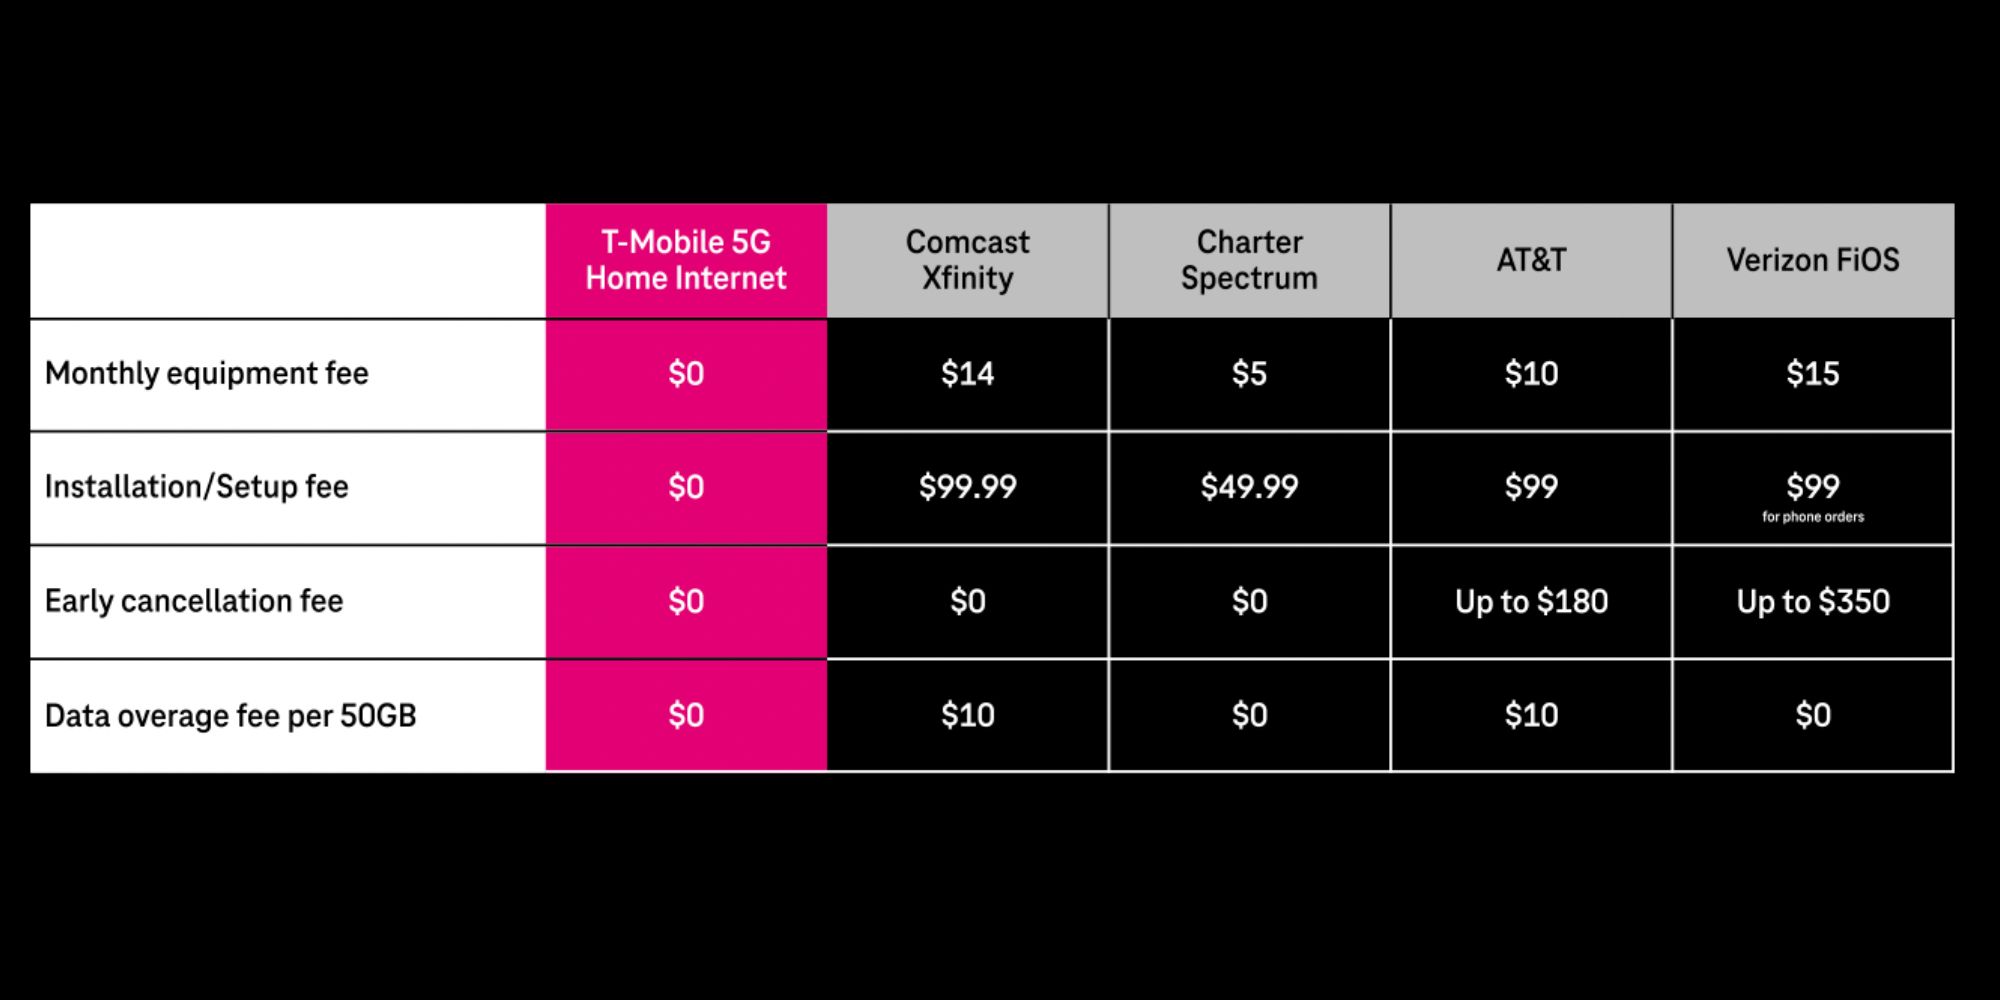 Fee comparisons for T-Mobile Home Internet